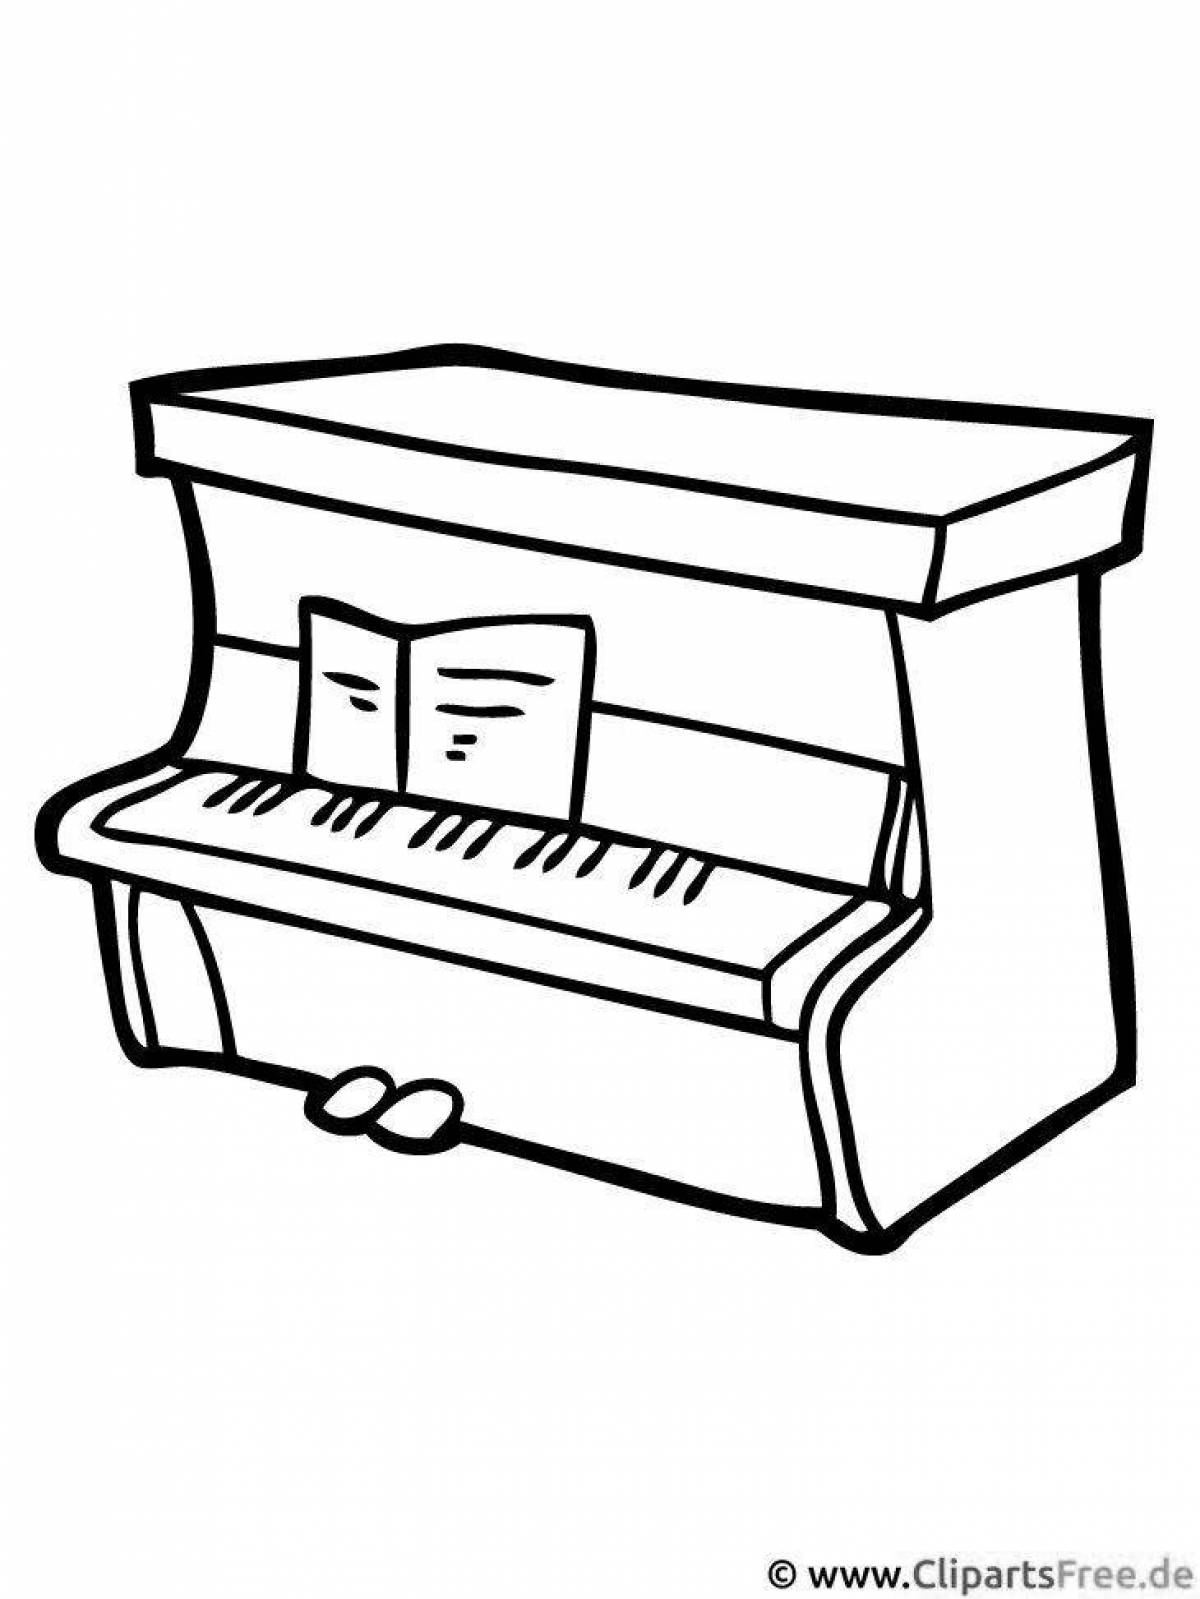 Live Piano Coloring Page